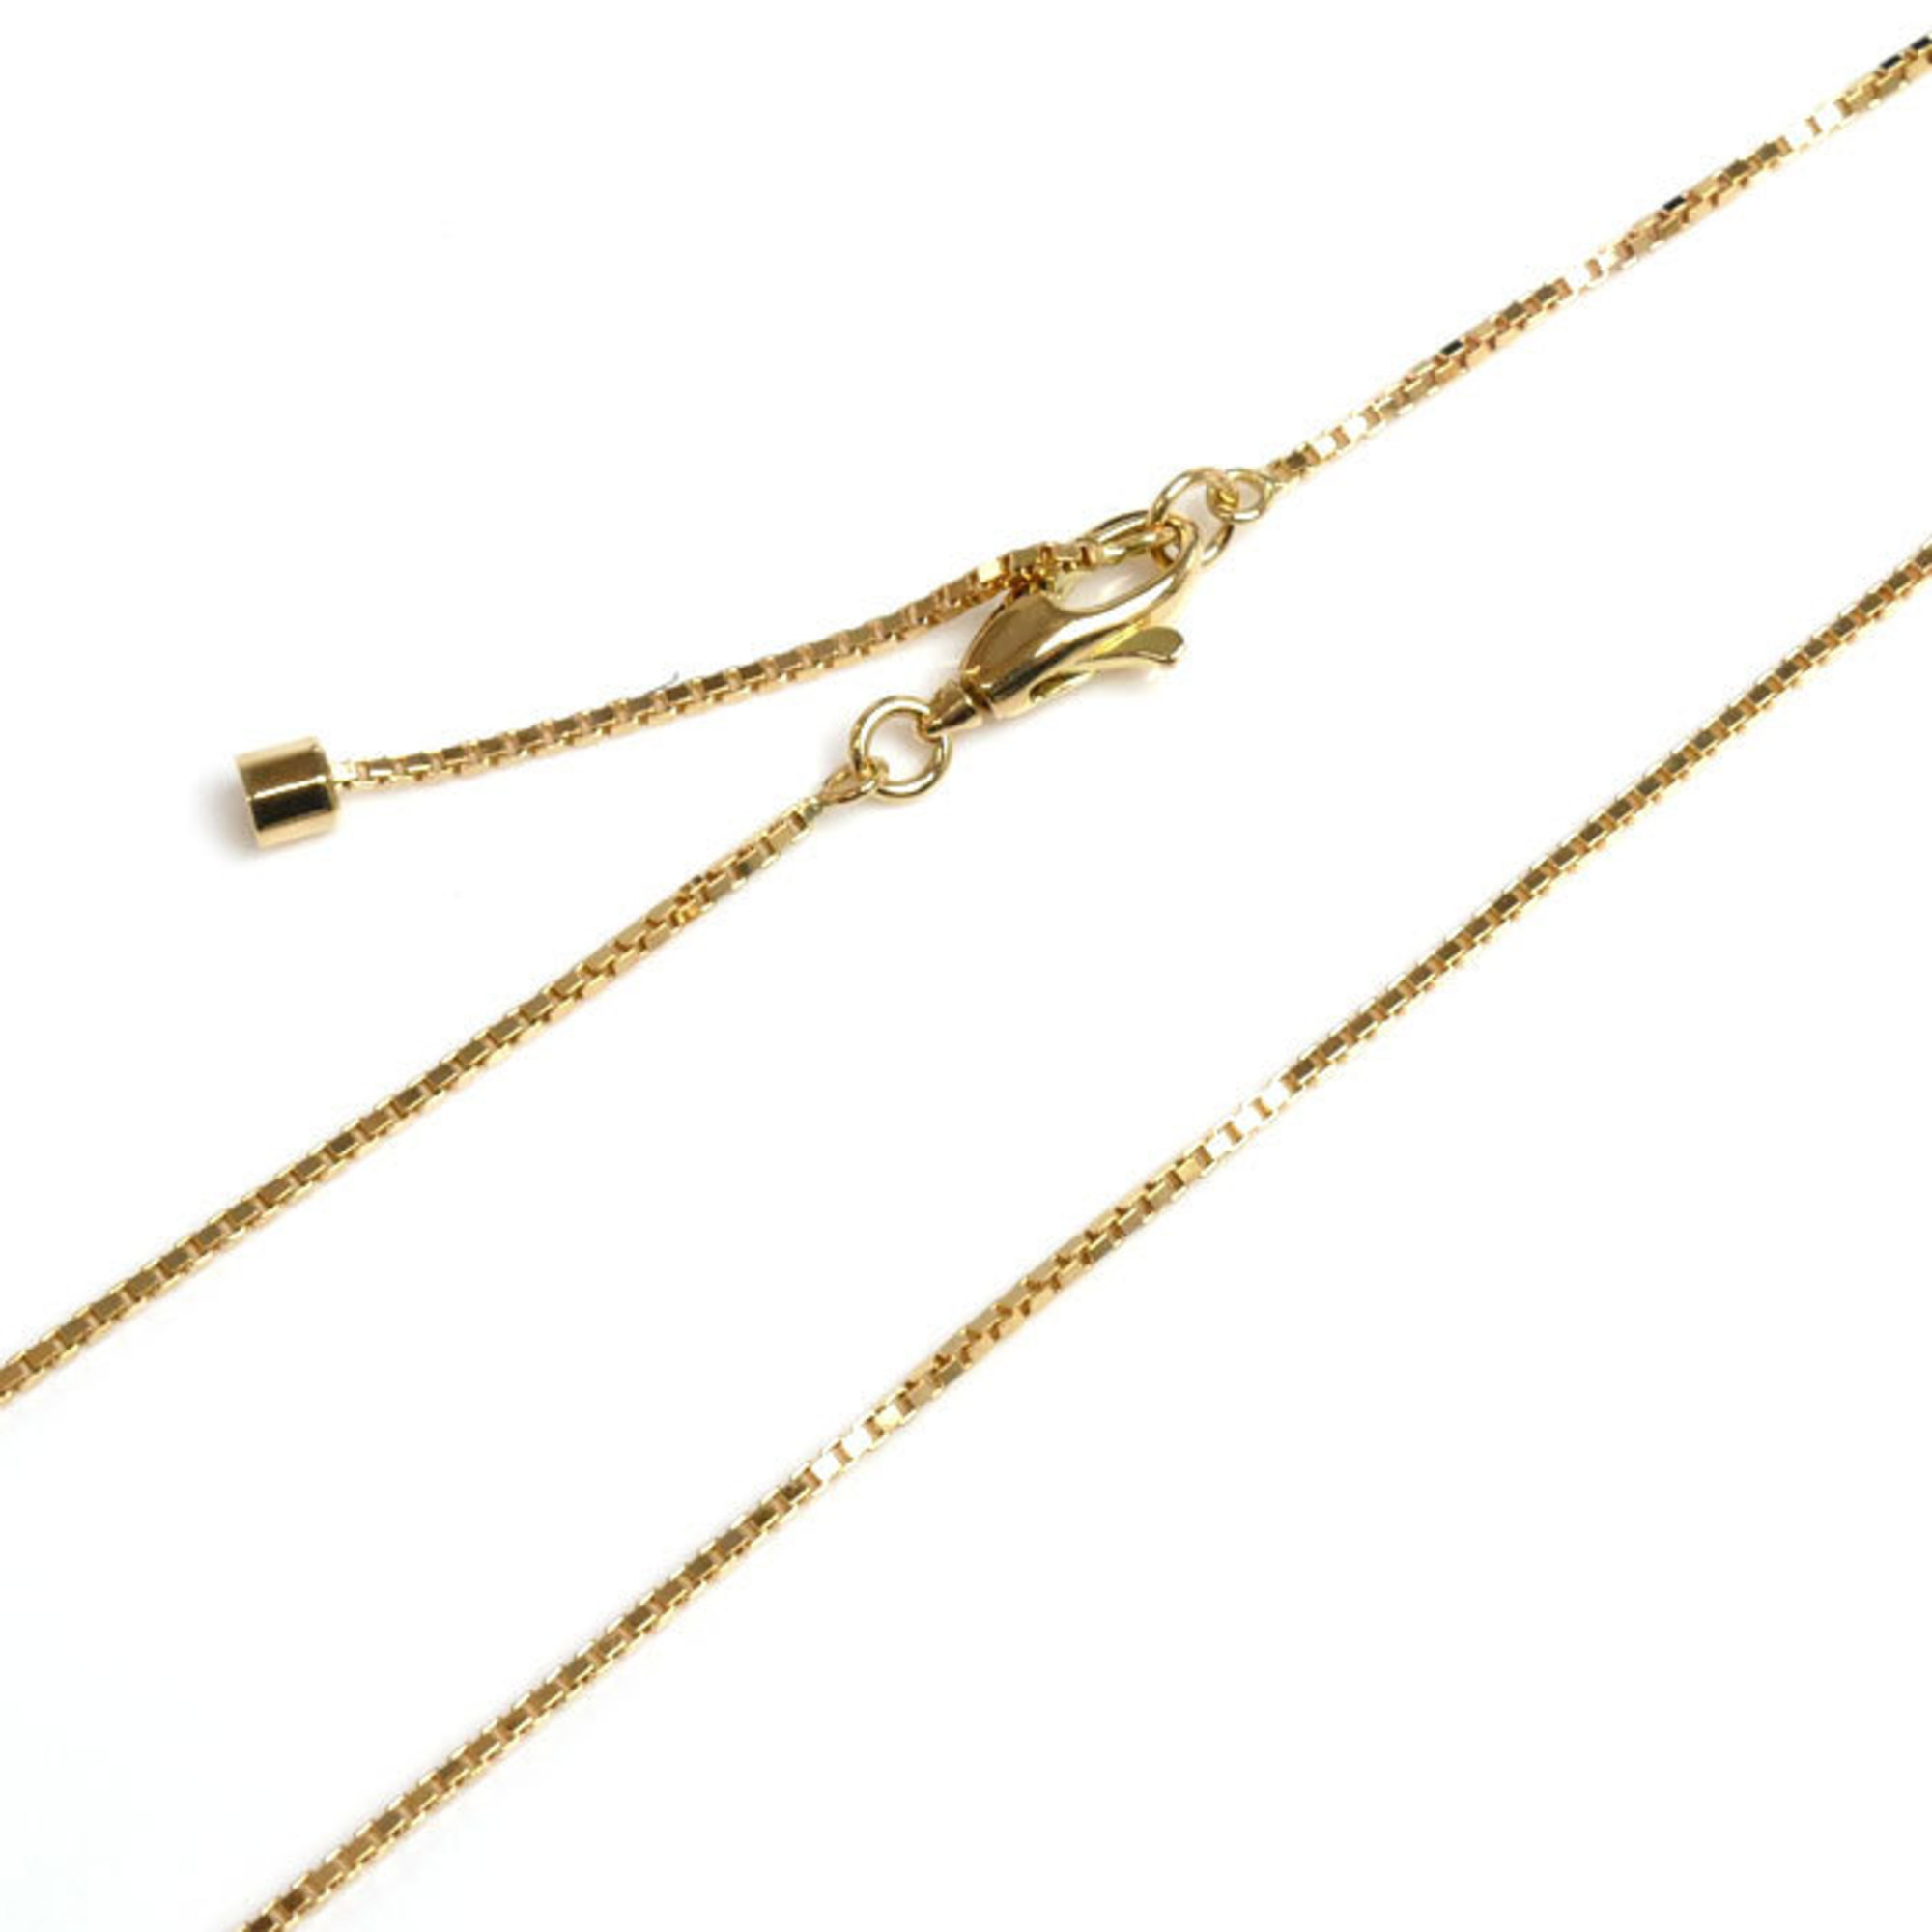 GUCCI K18YG Yellow Gold Link to Love Bar Necklace 662108 J8500 8000 5.5g 42-45cm Women's